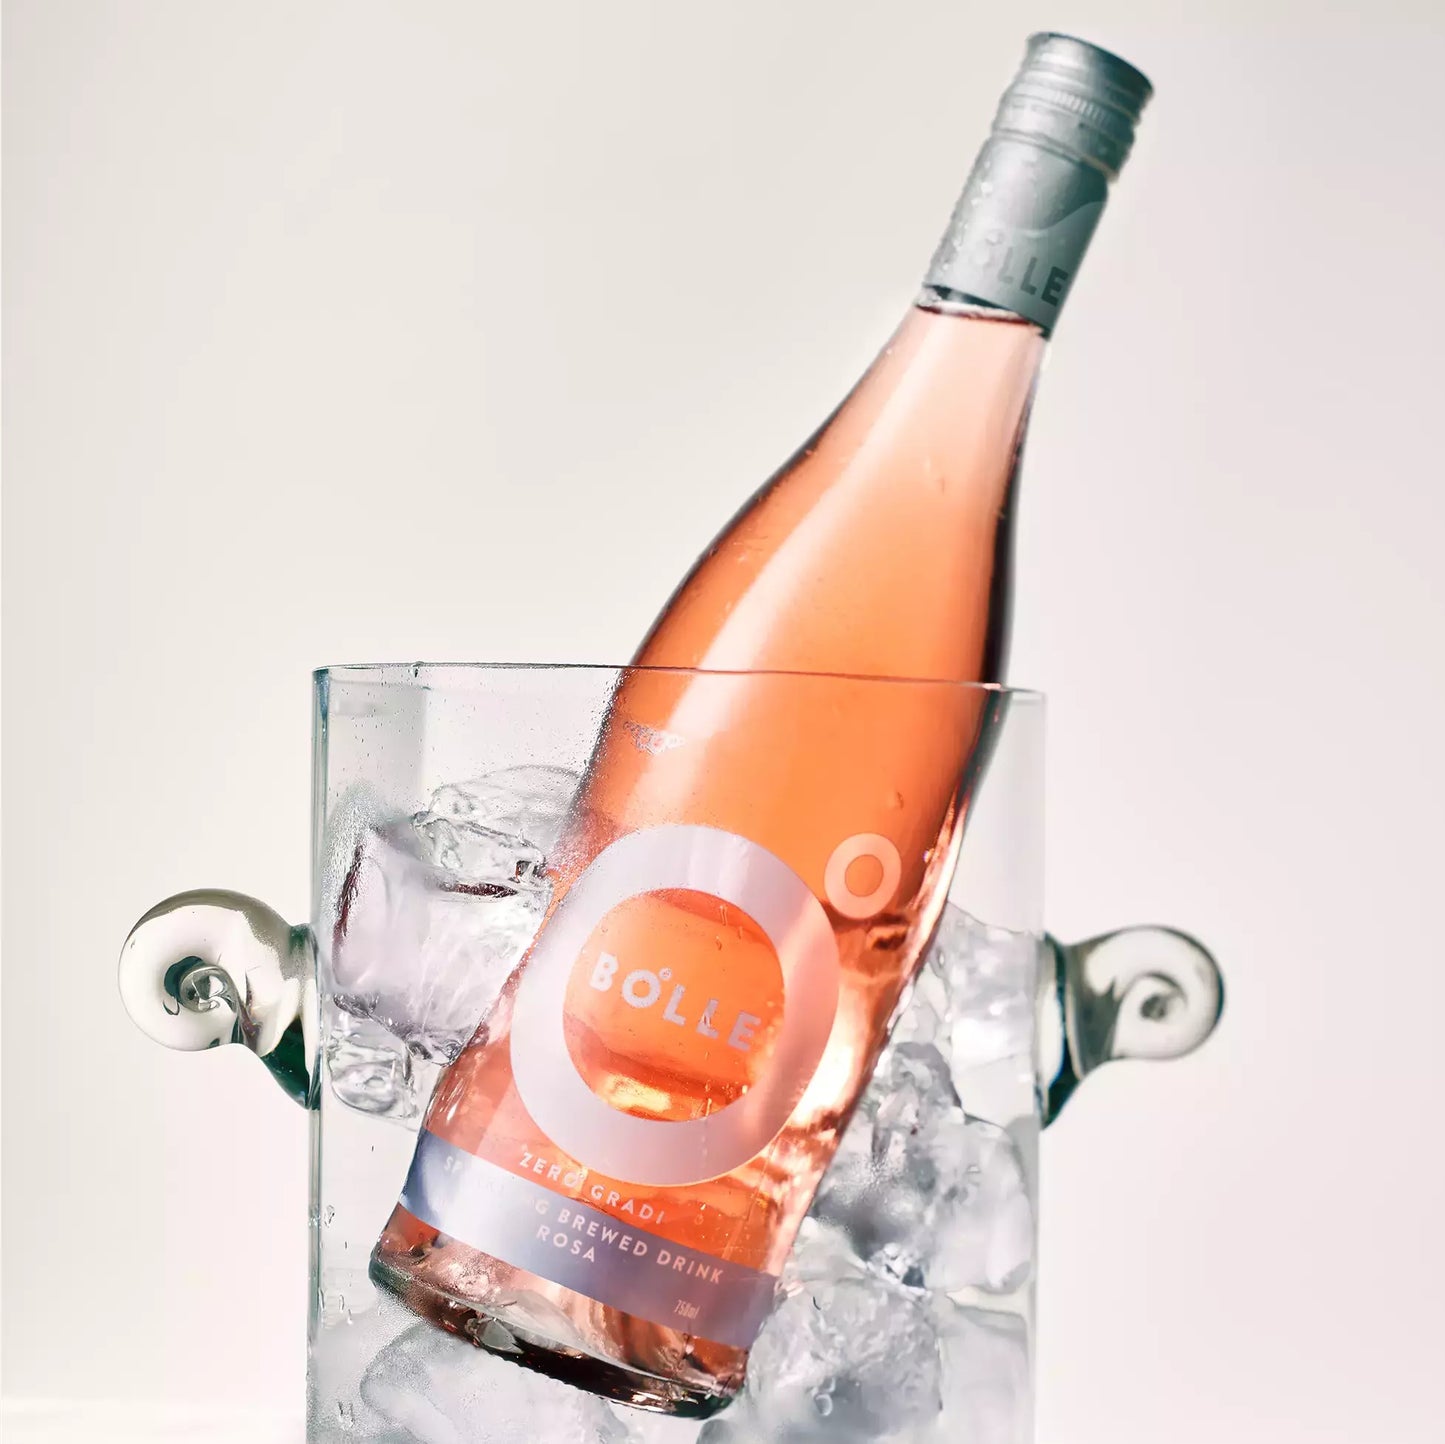 Bolle ROSA alcohol-free sparkling wine